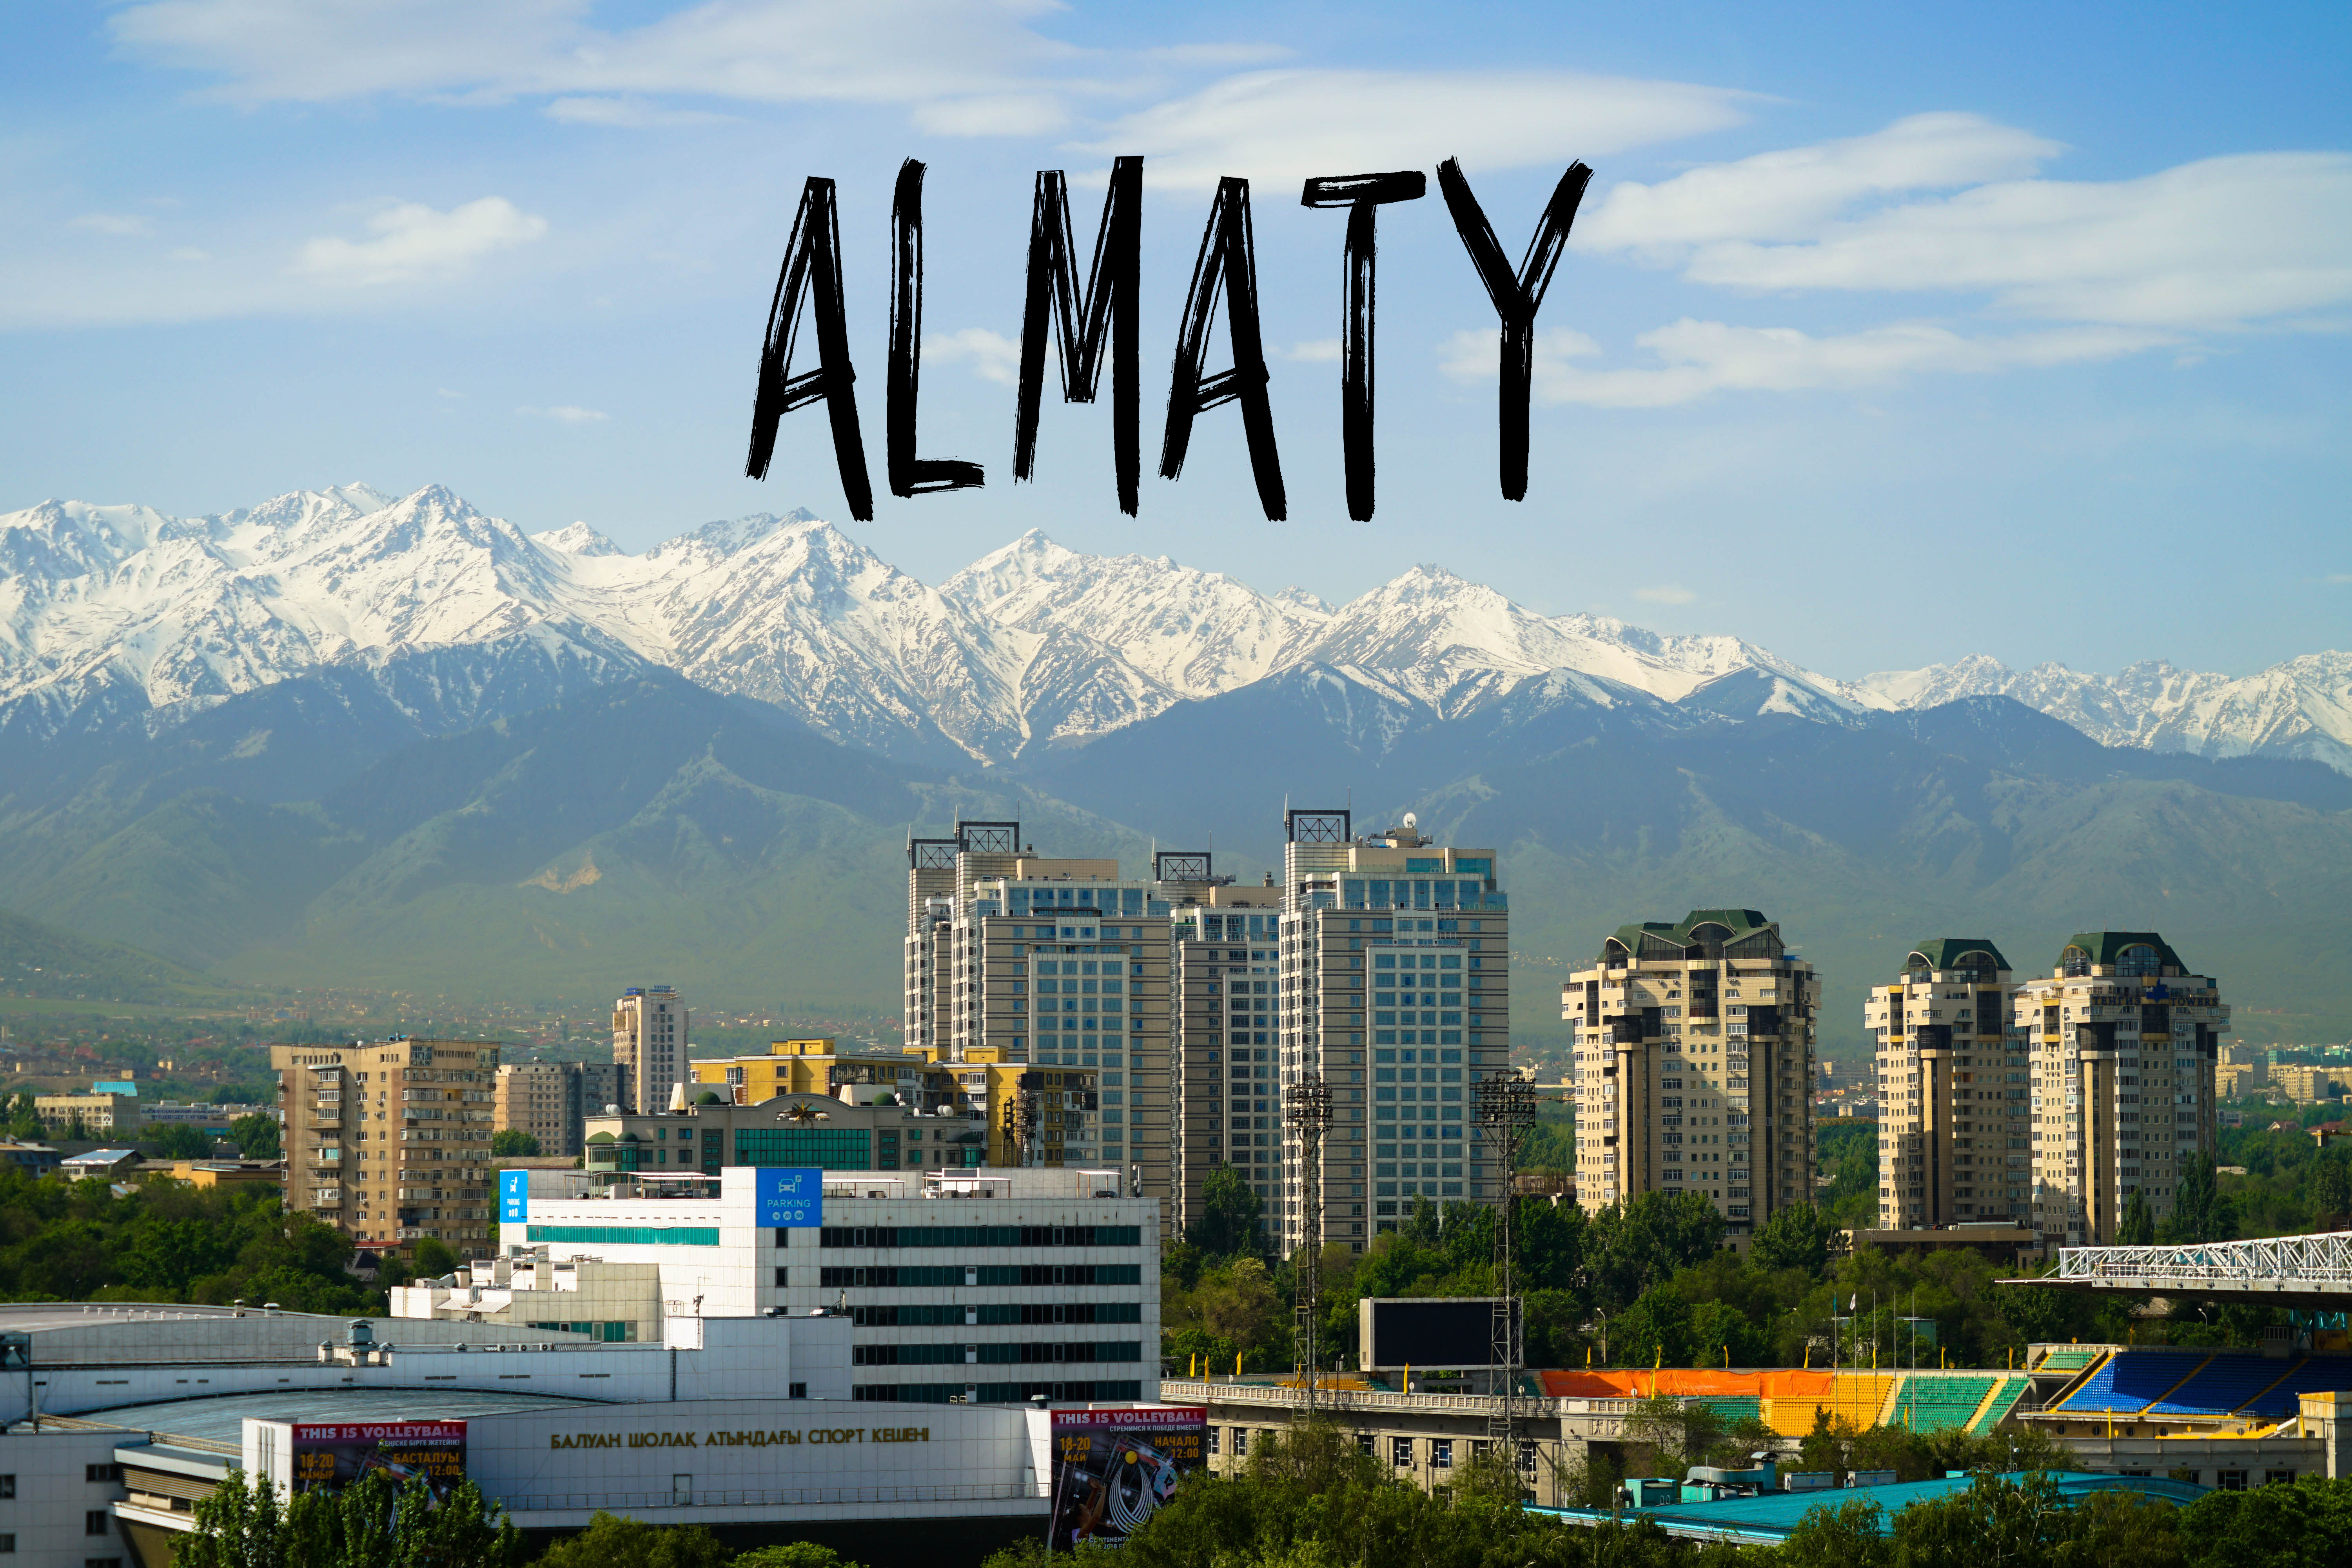 Almaty city view with text overlay Almaty